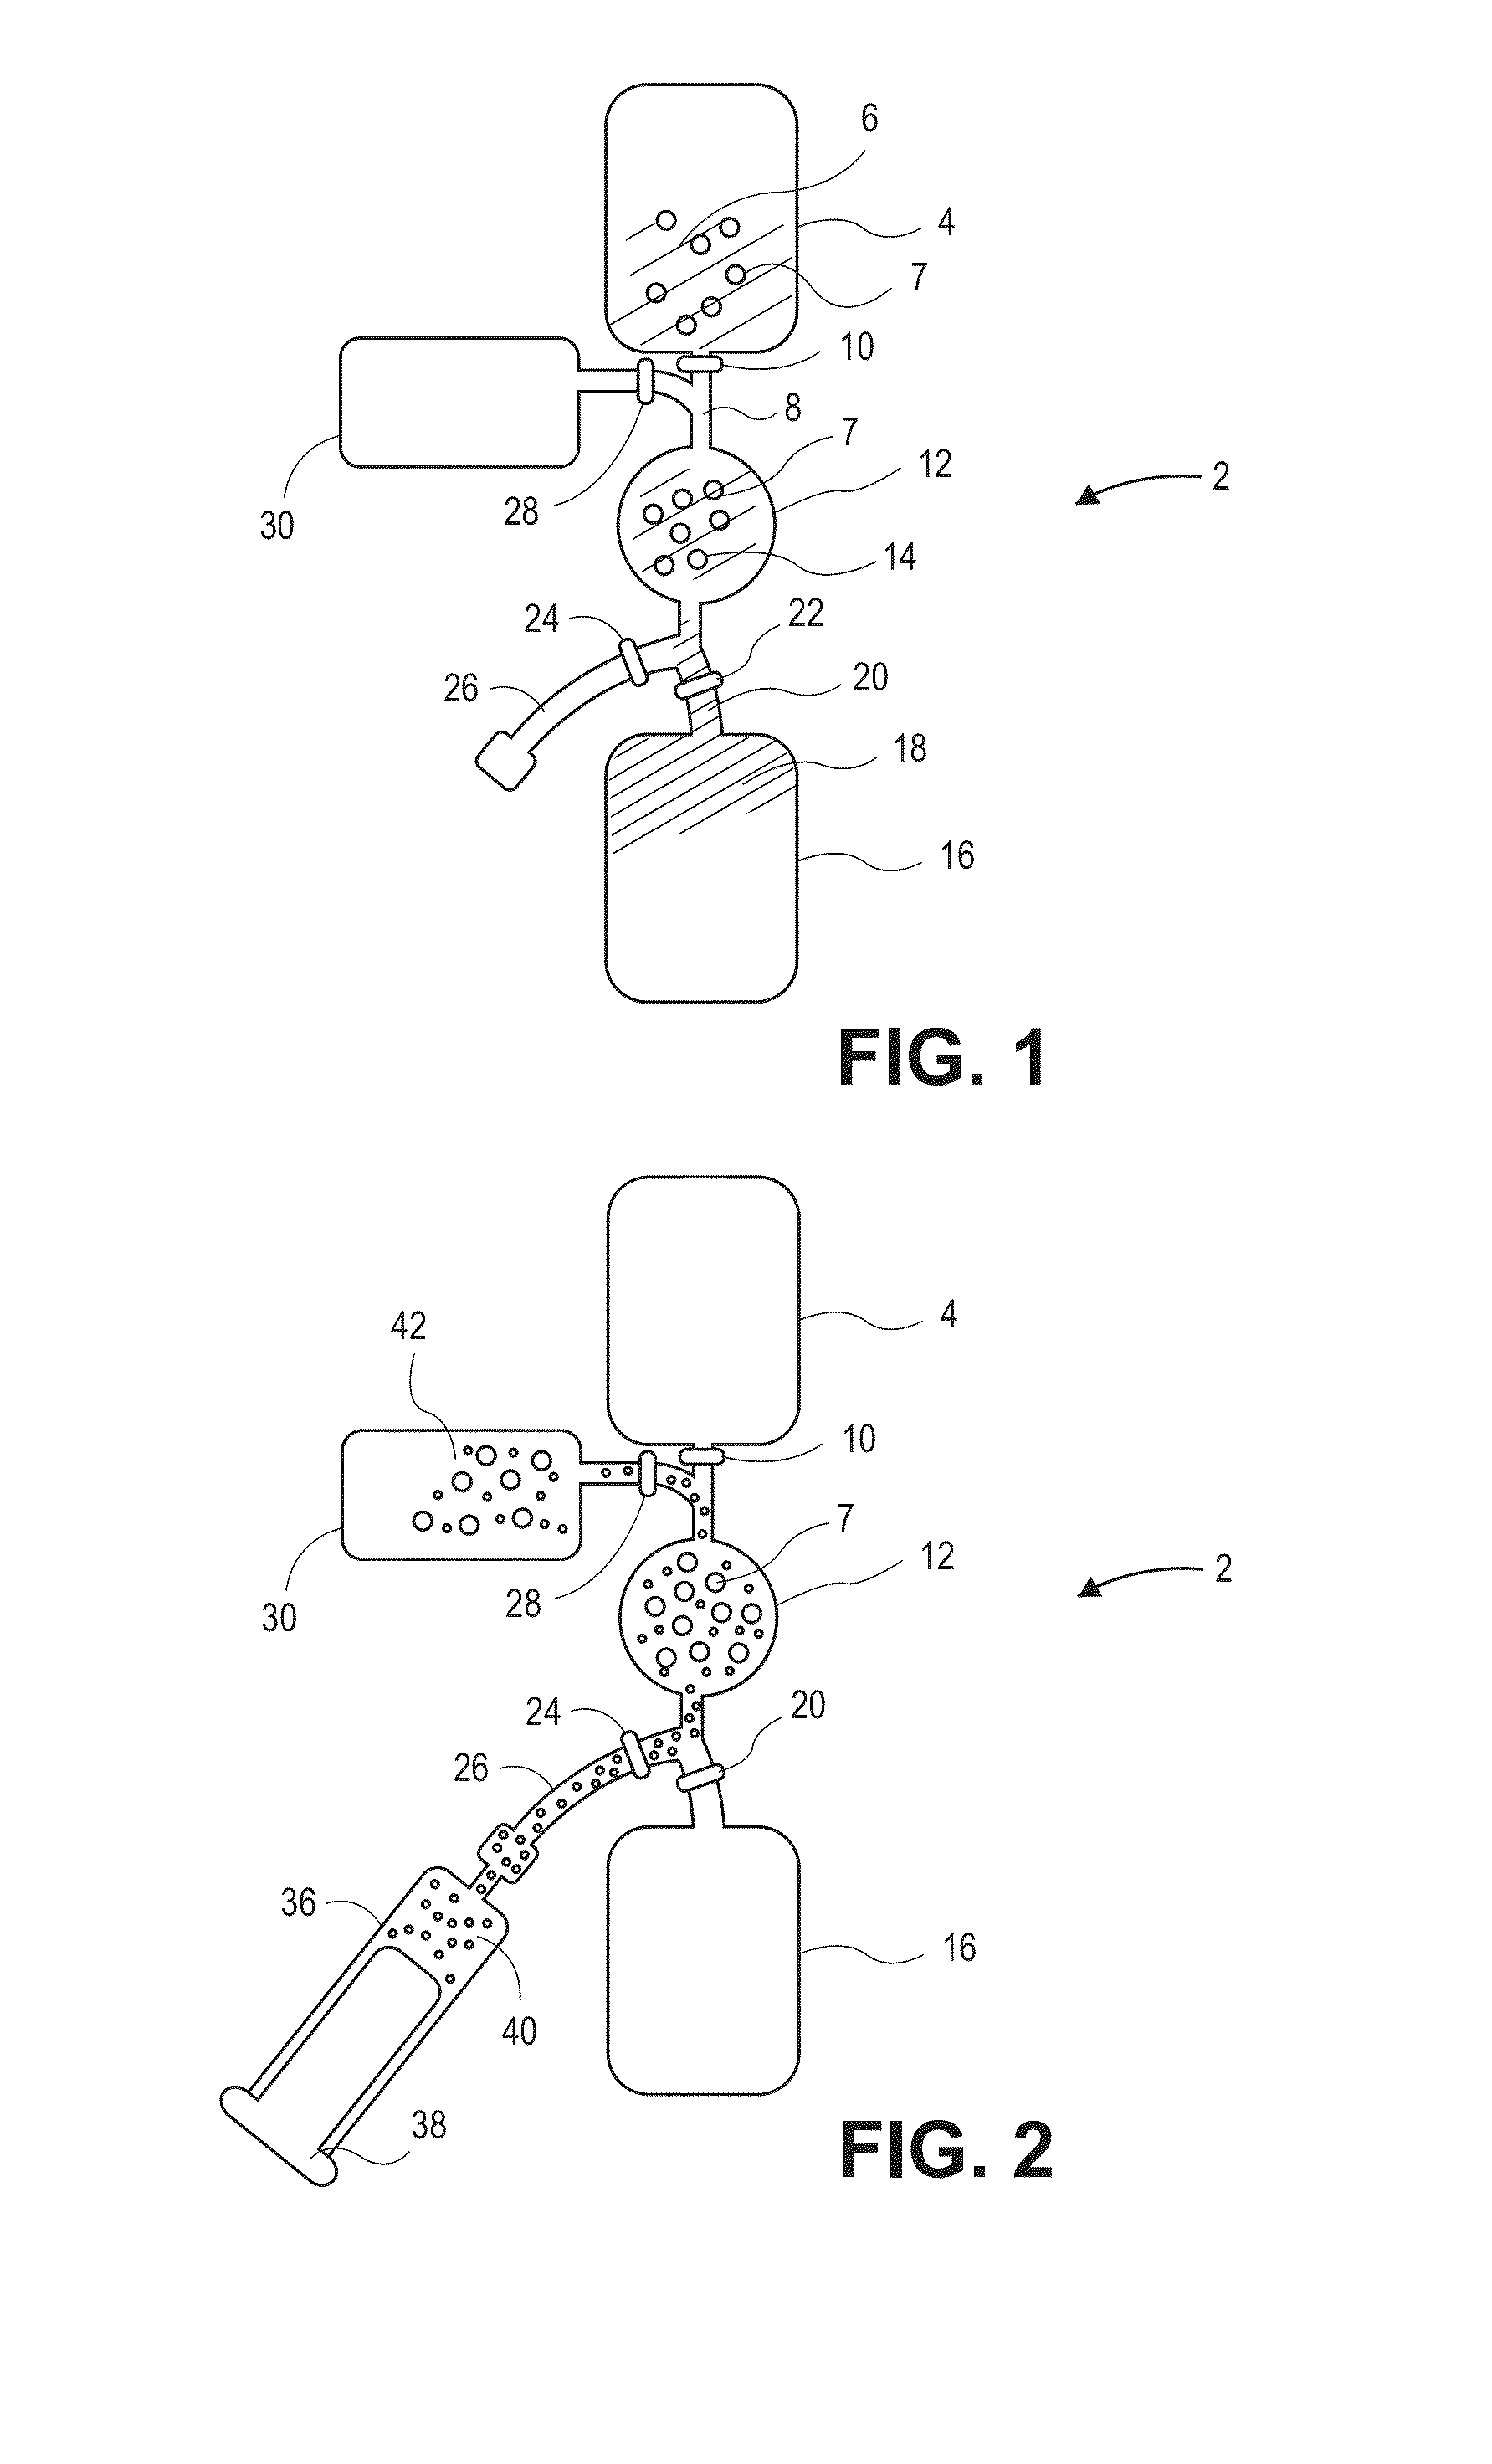 Methods and devices for obtaining and analyzing cells